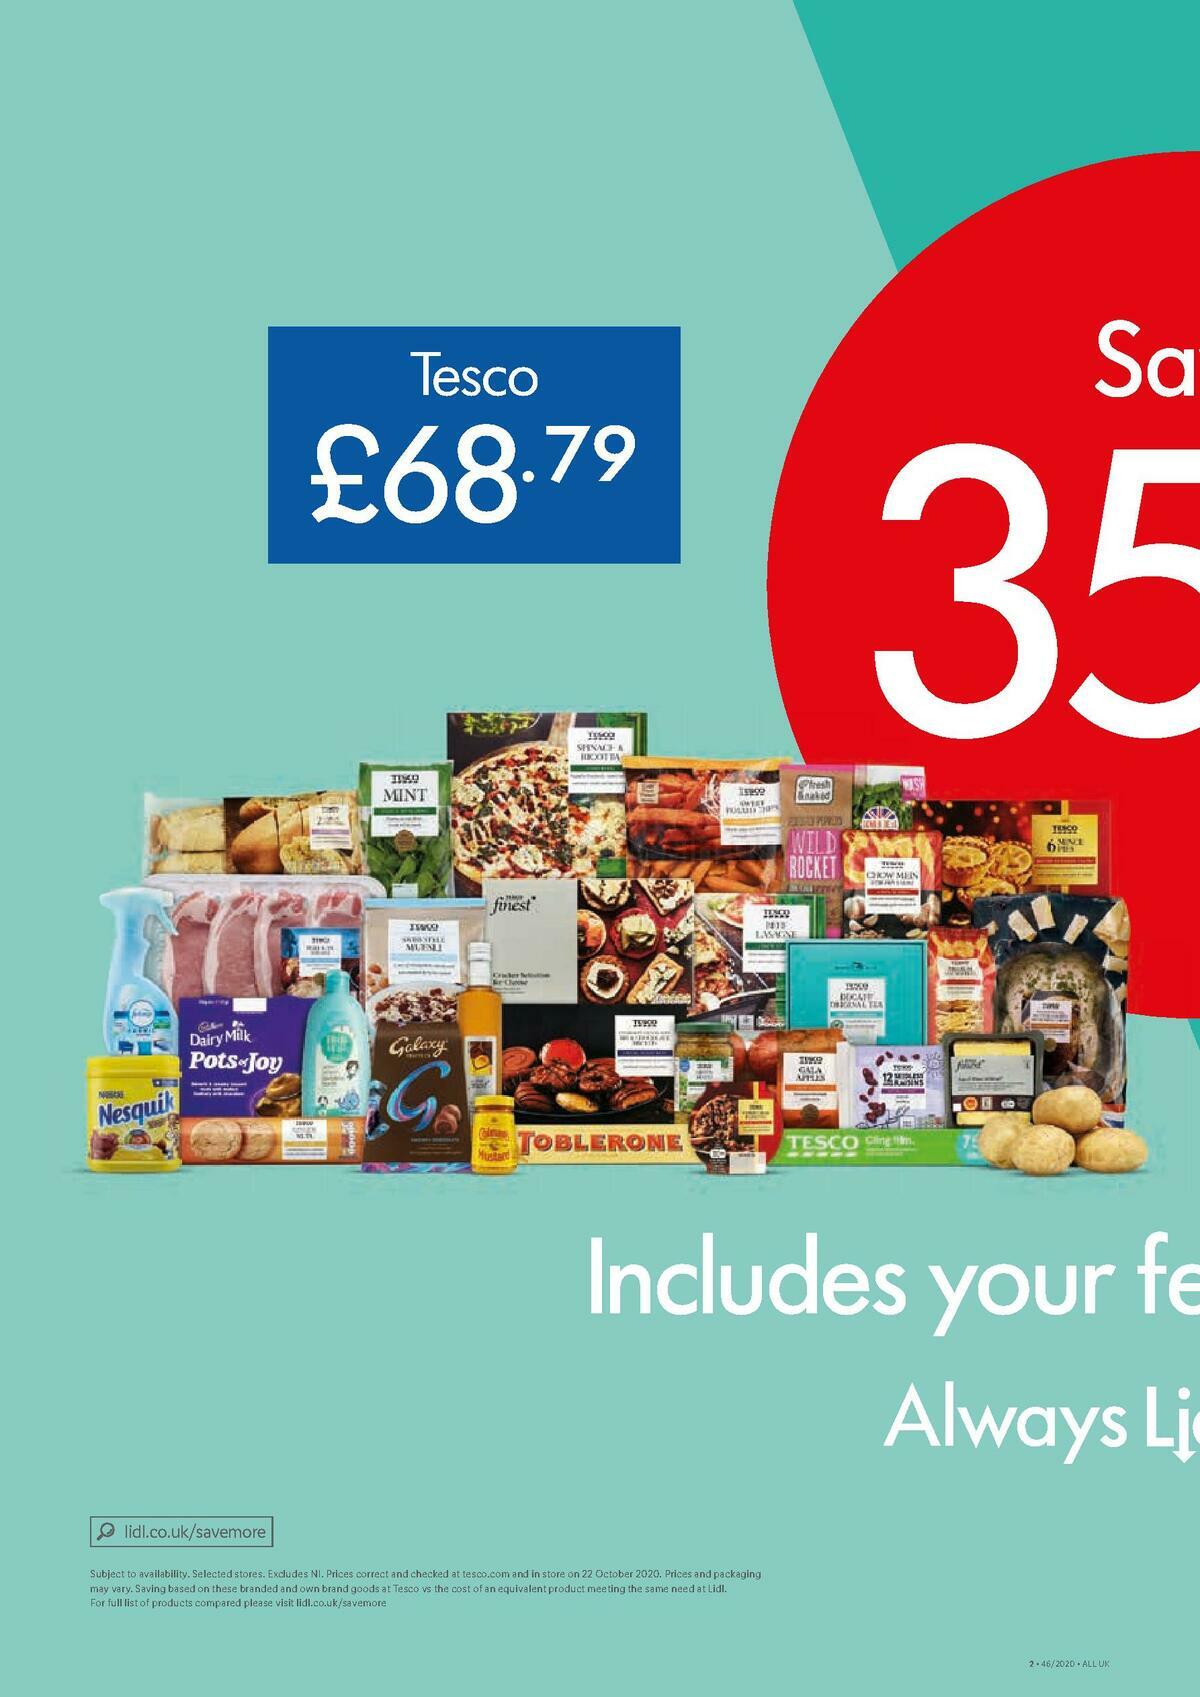 LIDL Offers from 12 November